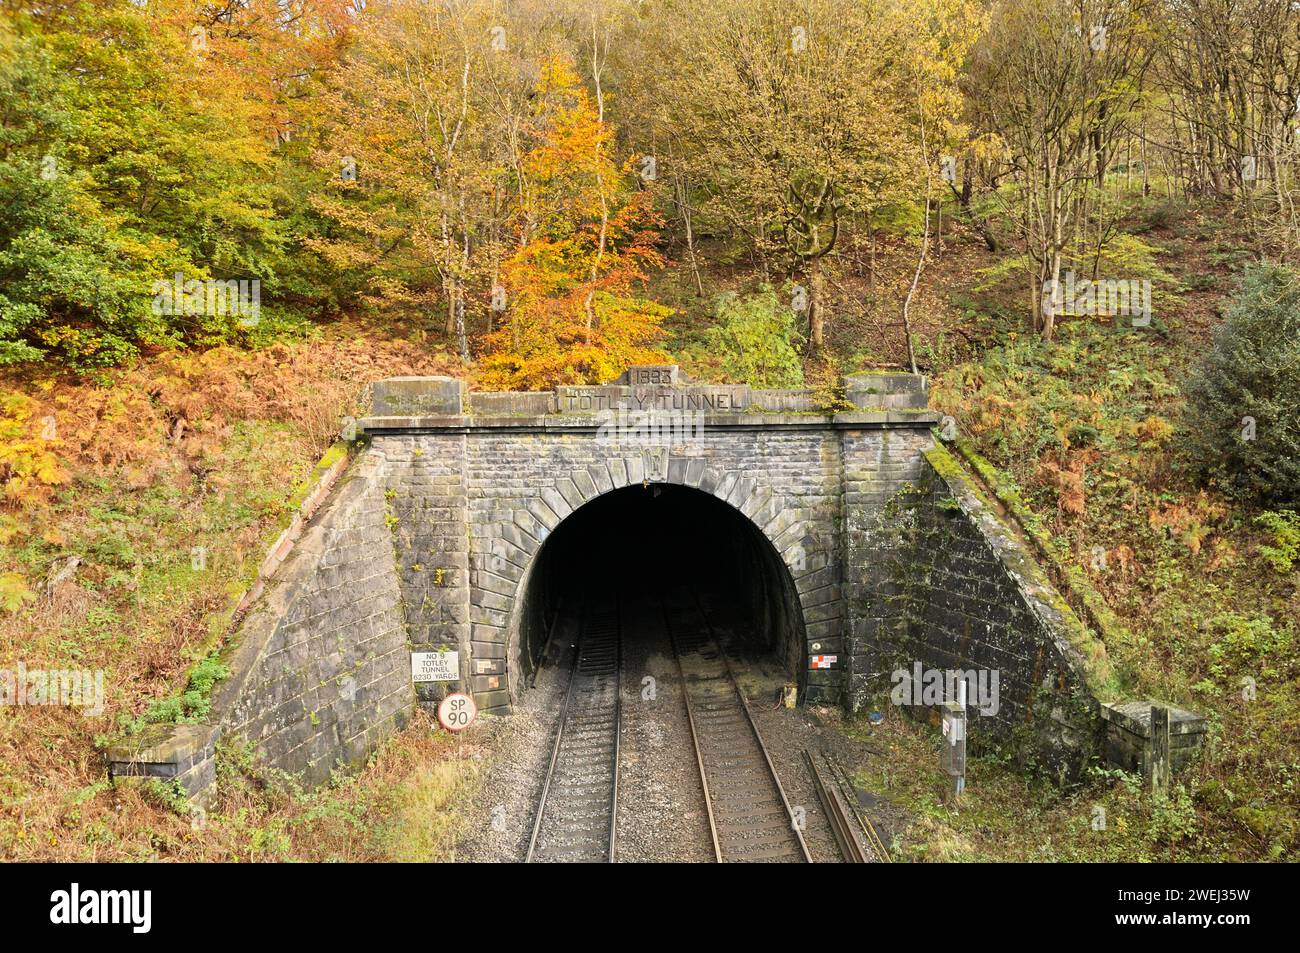 Totley Tunnel mouth surrounded by autumn colour at Padley Gorge in the Peak District, Derbyshire, England, UK. railway tunnel train tunnel train track Stock Photo